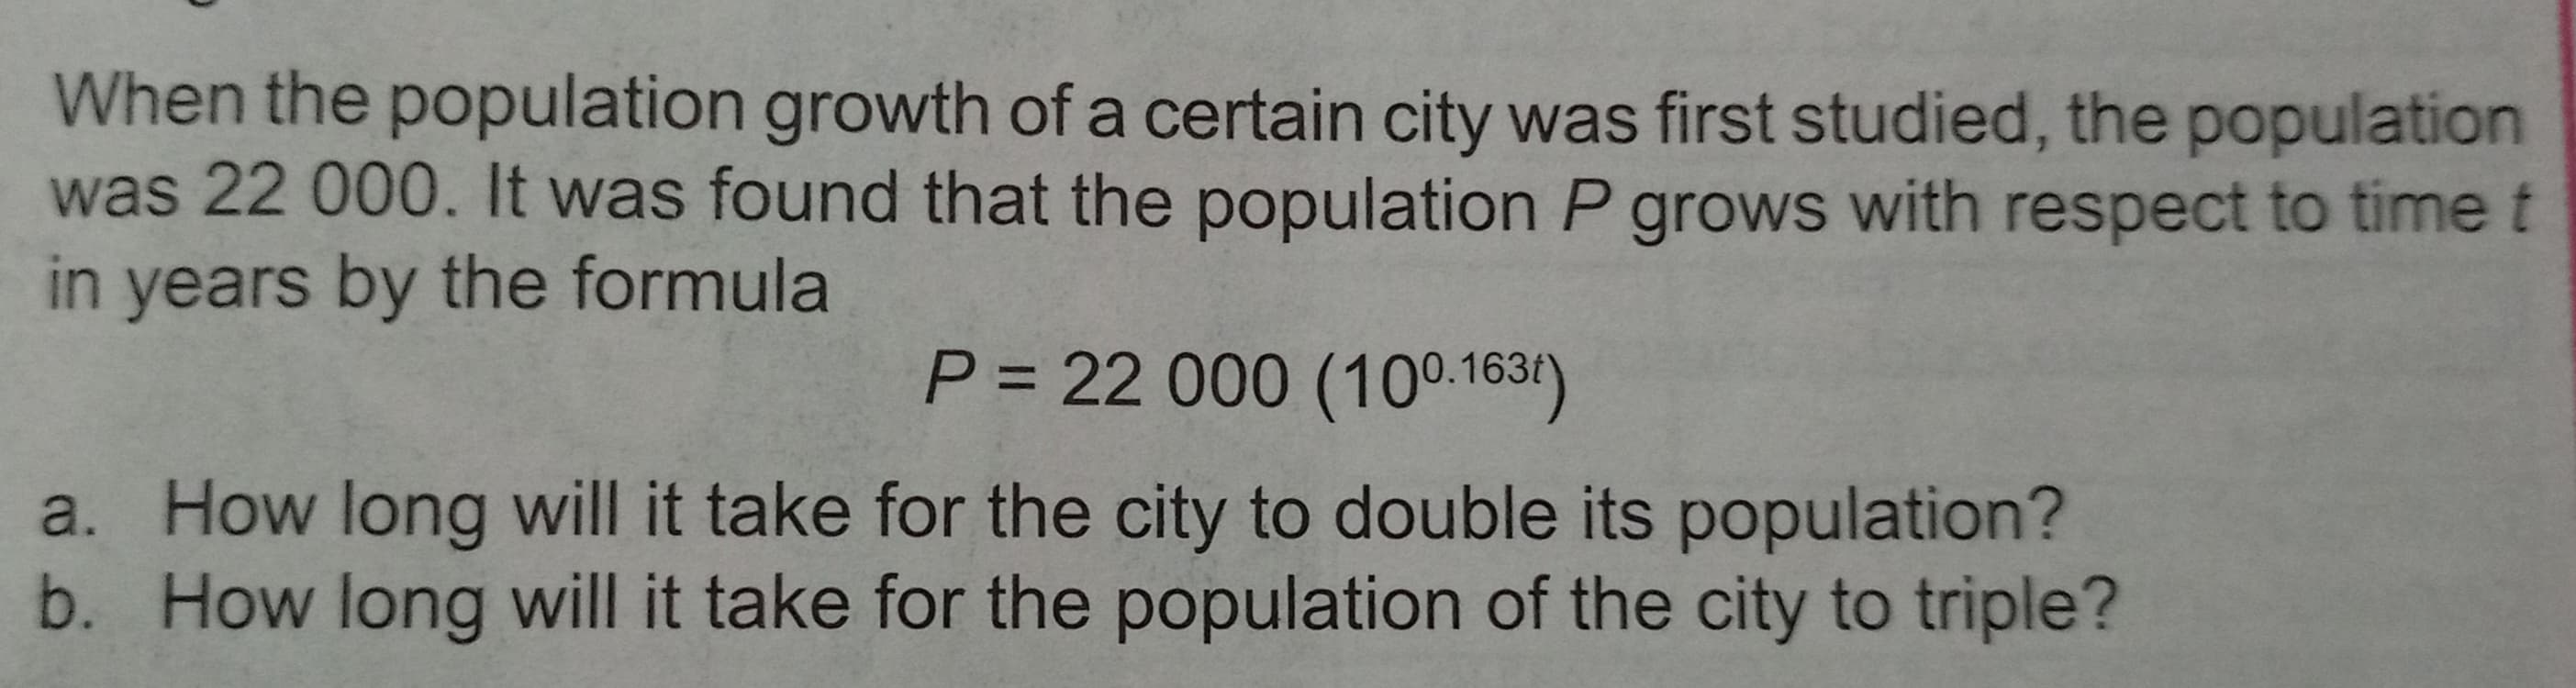 When the population growth of a certain city was first studied, the population
was 22 000. It was found that the population P grows with respect to time t
in years by the formula
P = 22 000 (100.1634)
a. How long will it take for the city to double its population?
b. How long will it take for the population of the city to triple?
